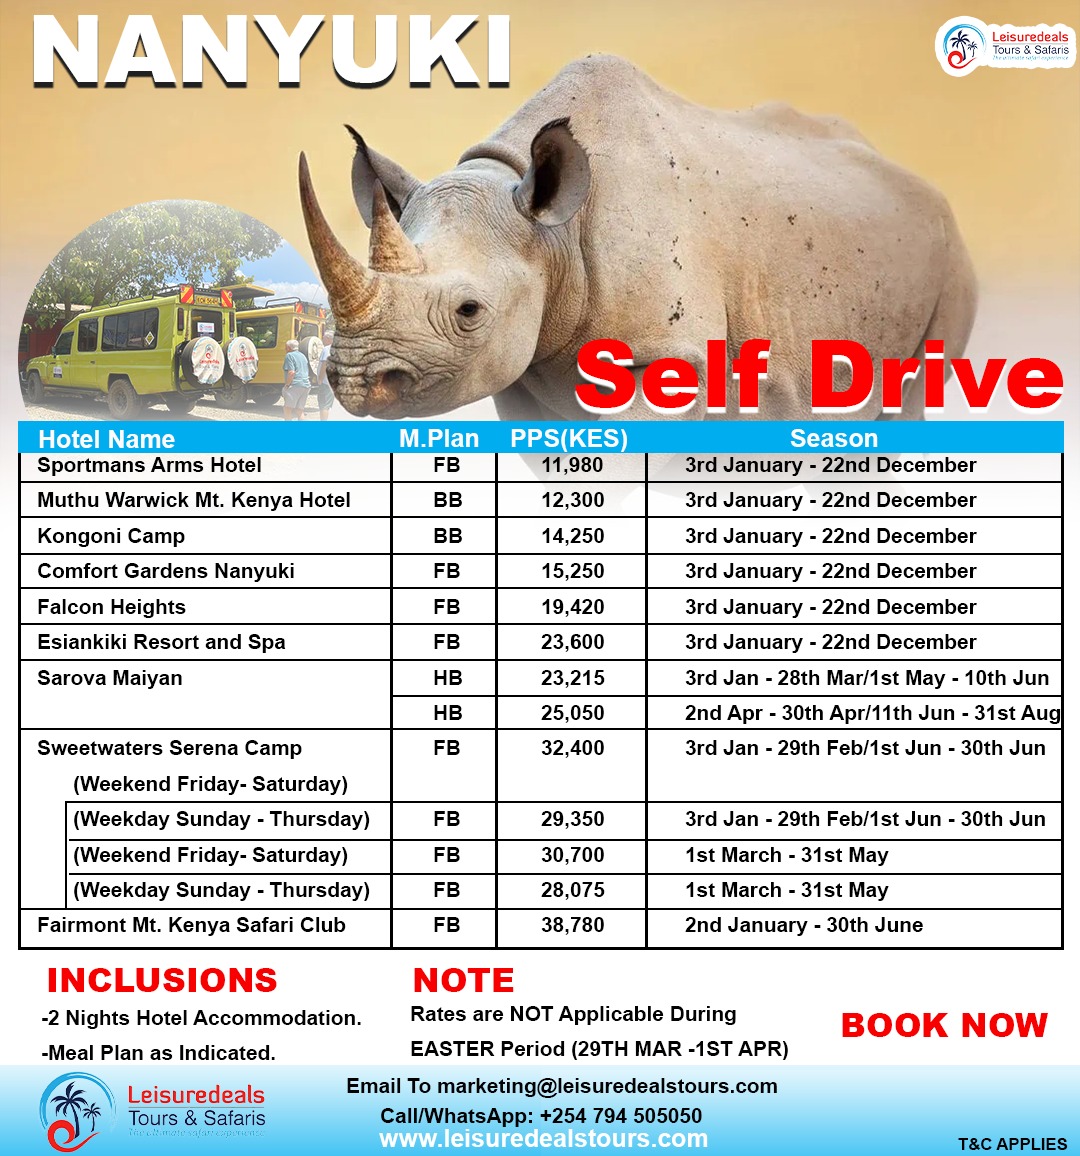 Nanyuki is a perfect place to enable colleagues to create a bond with each other ... Bush/ Game Holiday Packages

𝗡𝗕: 𝗟𝗶𝗽𝗮 𝗣𝗼𝗹𝗲𝗣𝗼𝗹𝗲 𝗔𝘃𝗮𝗶𝗹𝗮𝗯𝗹𝗲
#Leisuredealstours #lipapolepole #nanyuki2024rates #bushholidaypackages #safarivacation #Mpesa